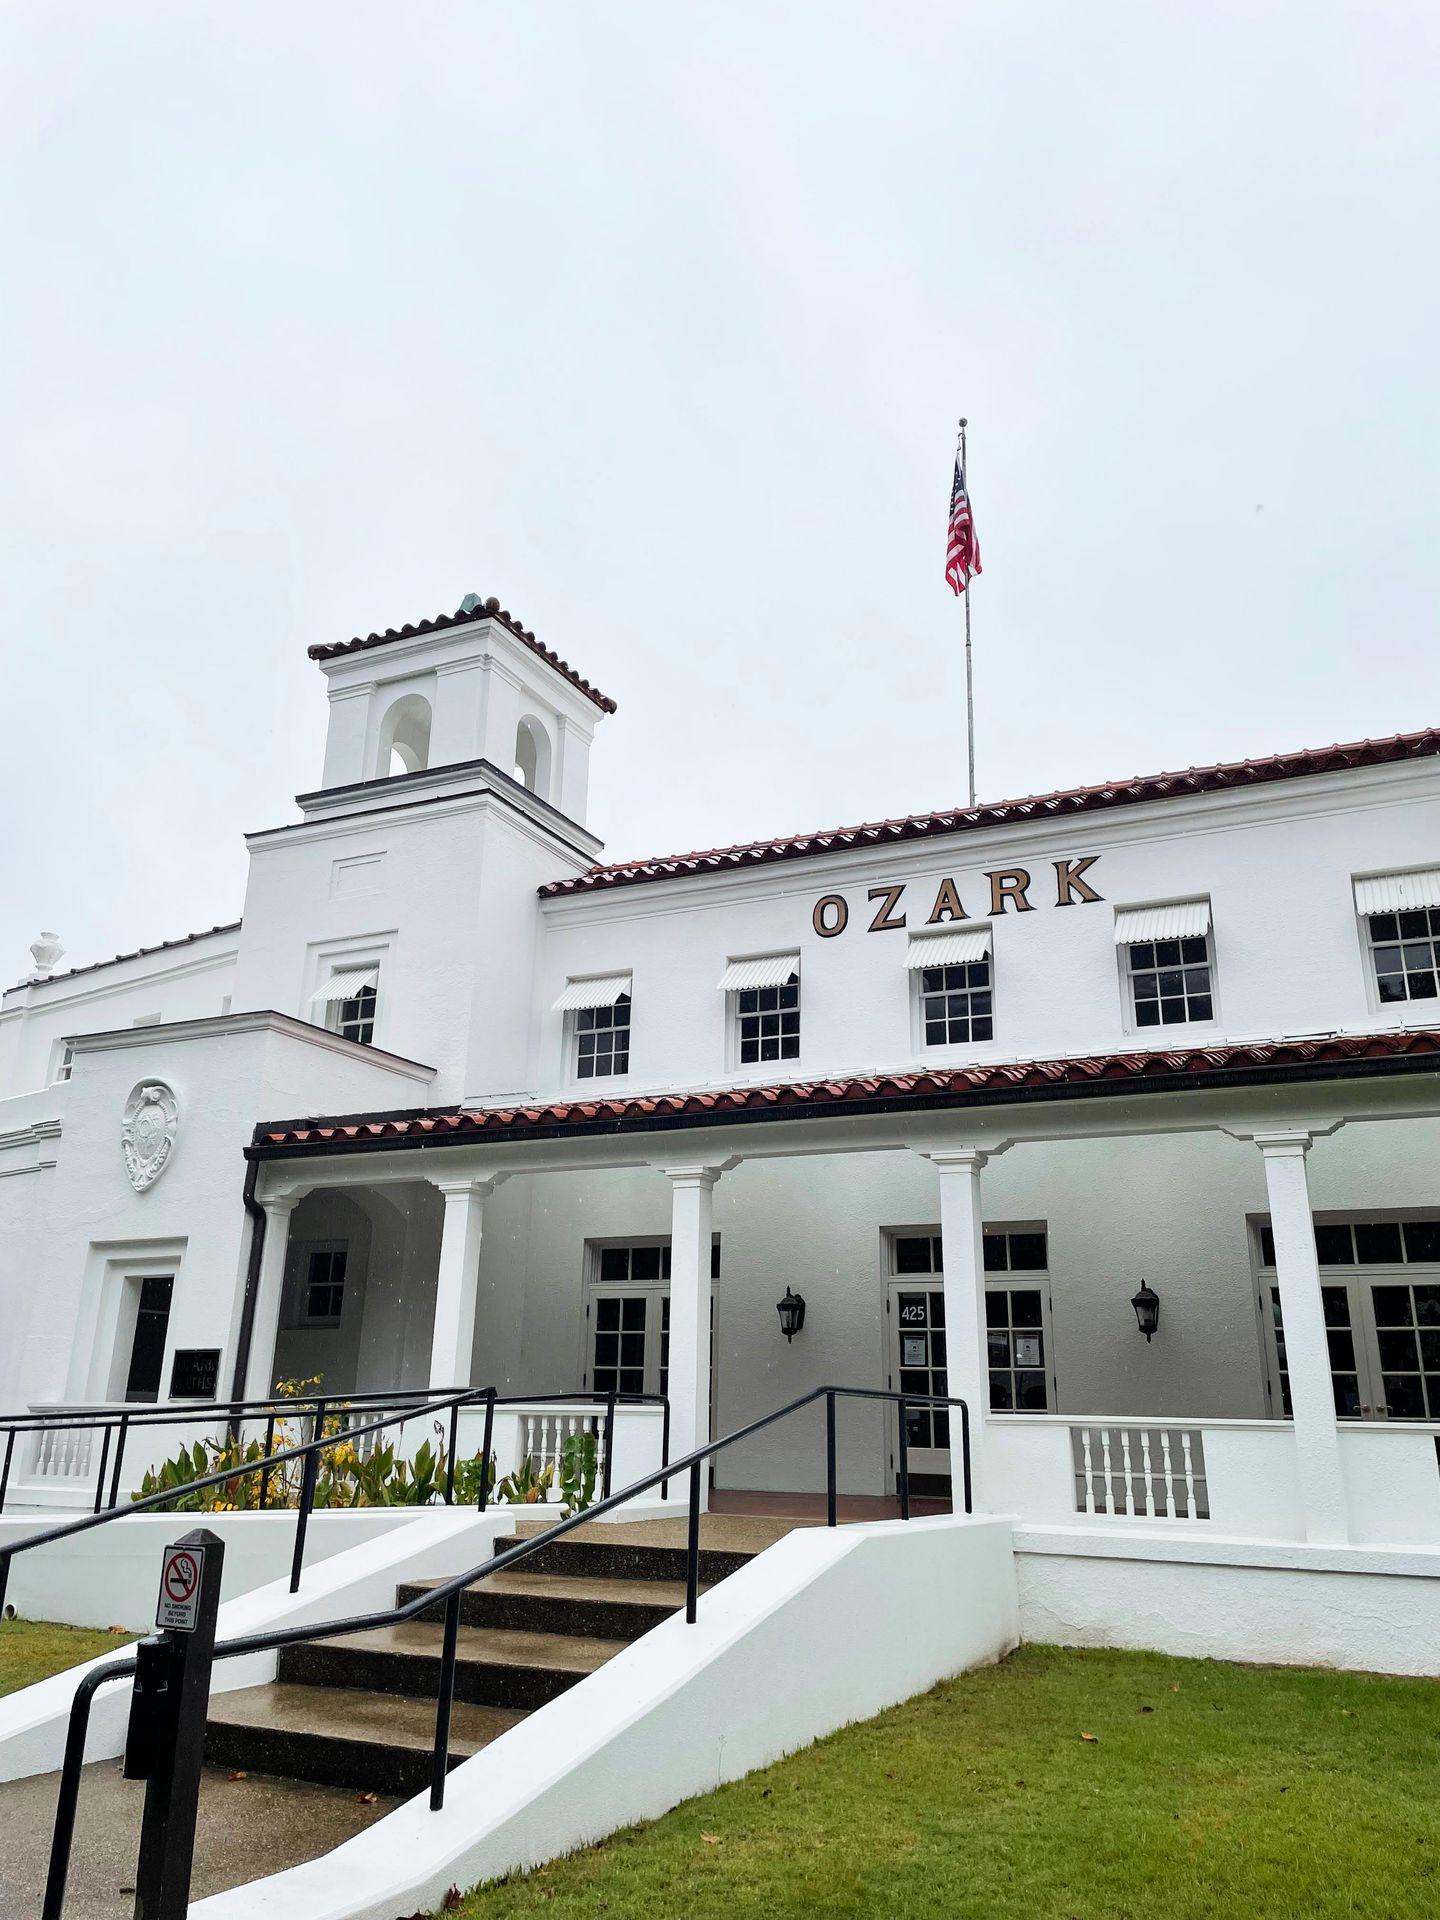 The historic Ozark bathhouse, which is a white art deco style building that now houses the Hot Springs National Park Cultural Center